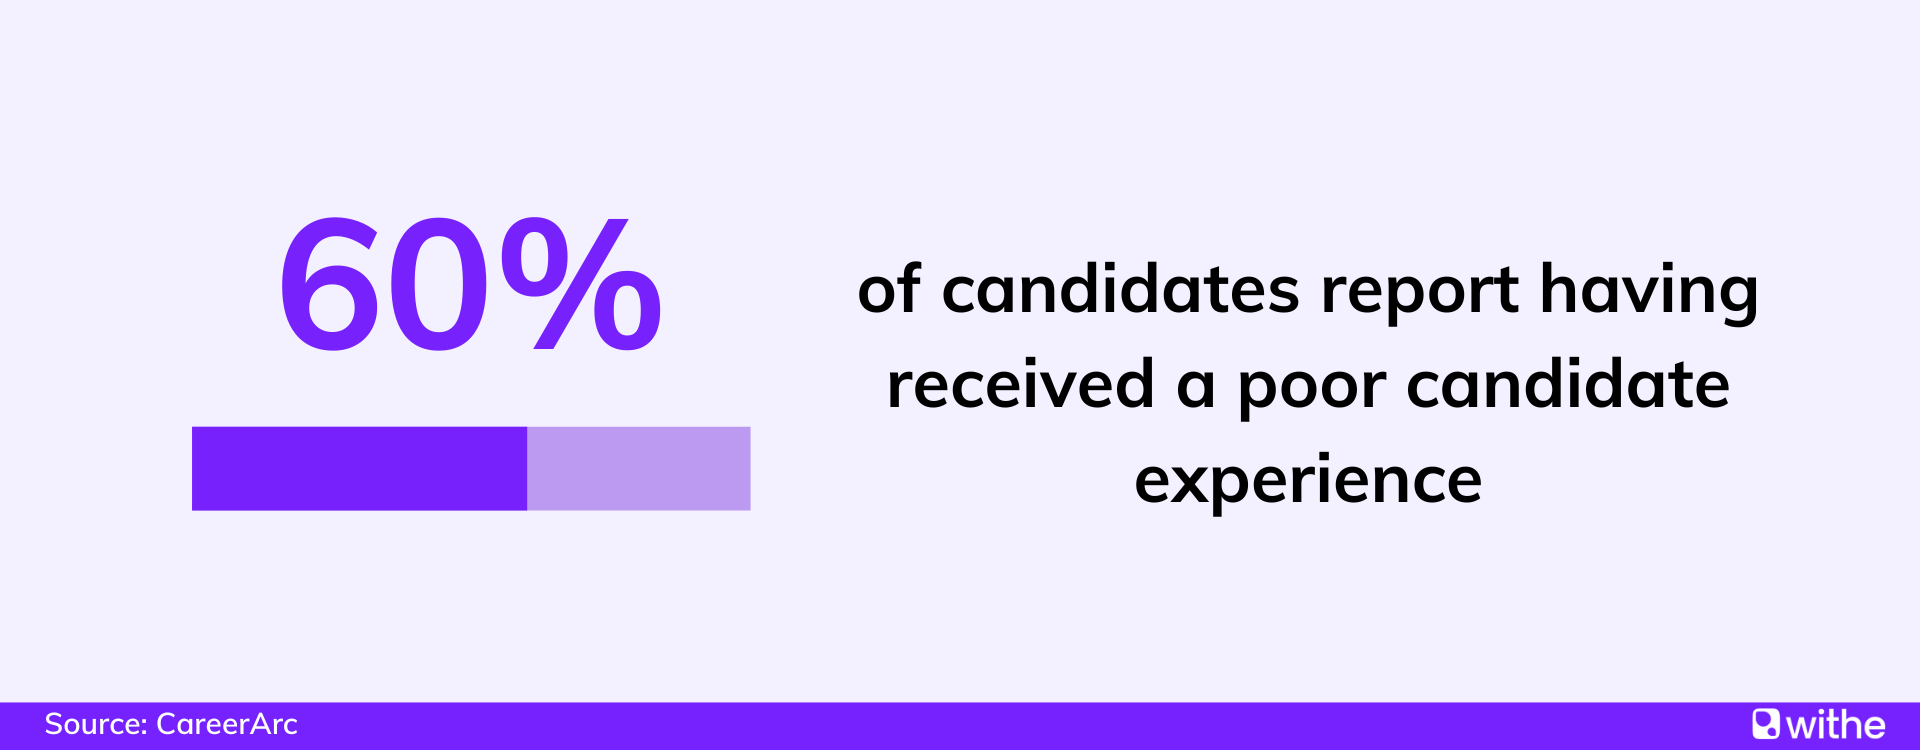 Candidate experience statistics - 60% of candidates report having received a poor candidate experience